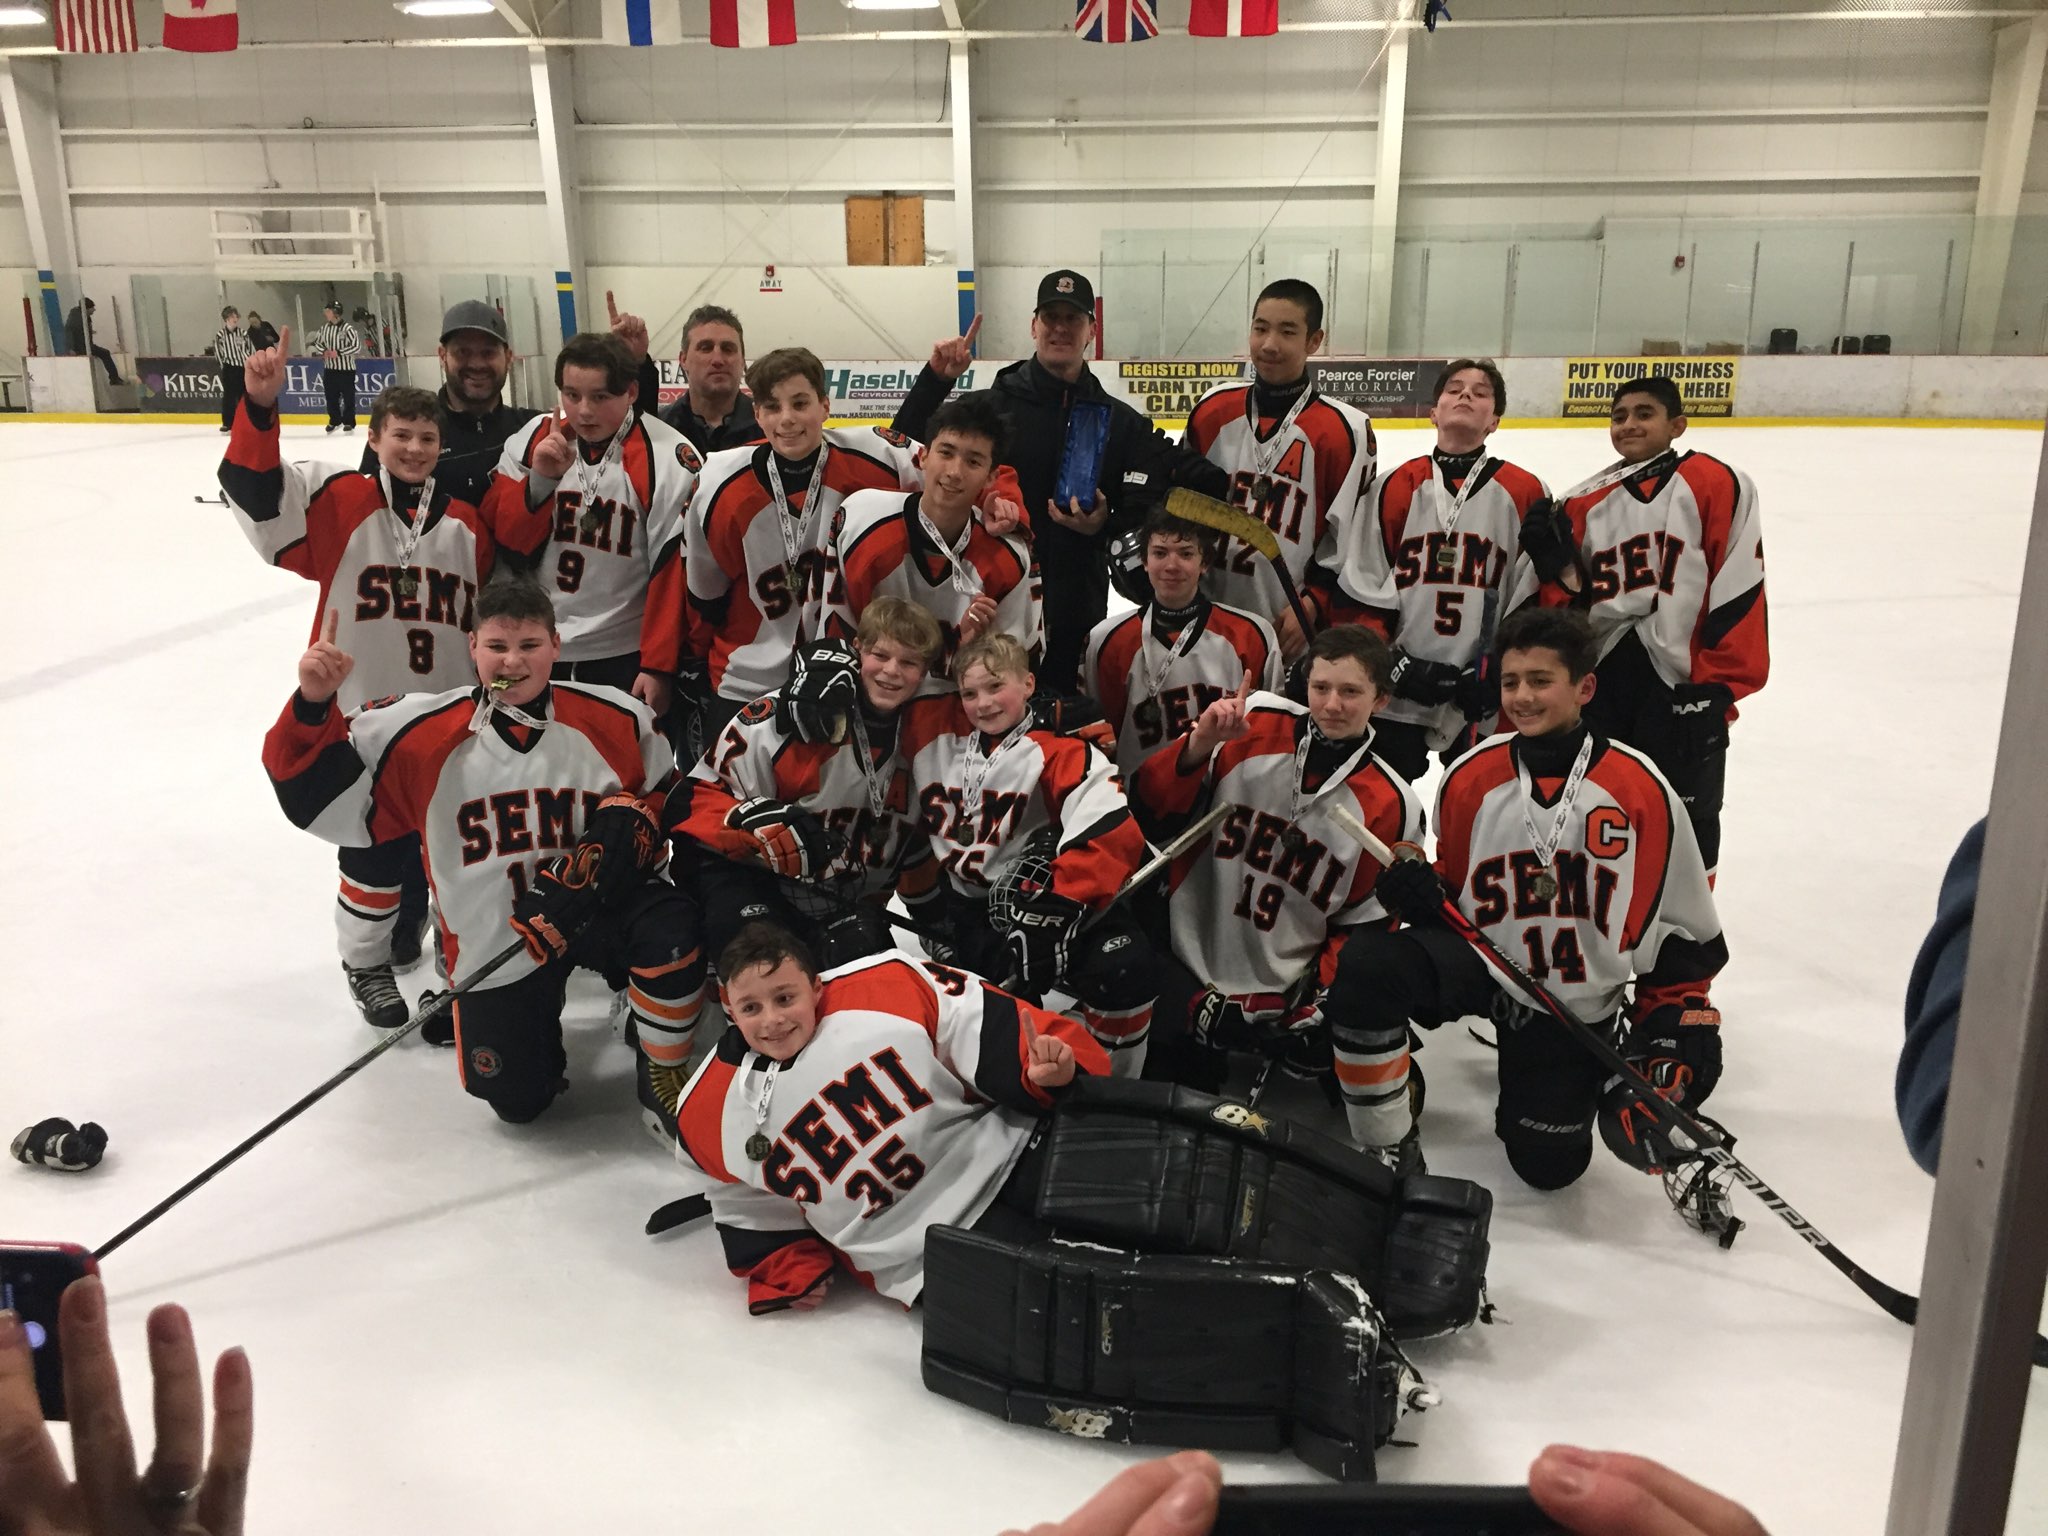 January 19, 2020 ~ Bantam C3 swept the Battle for the Sound tournament in Bremerton to bring home the GOLD! Way to go!